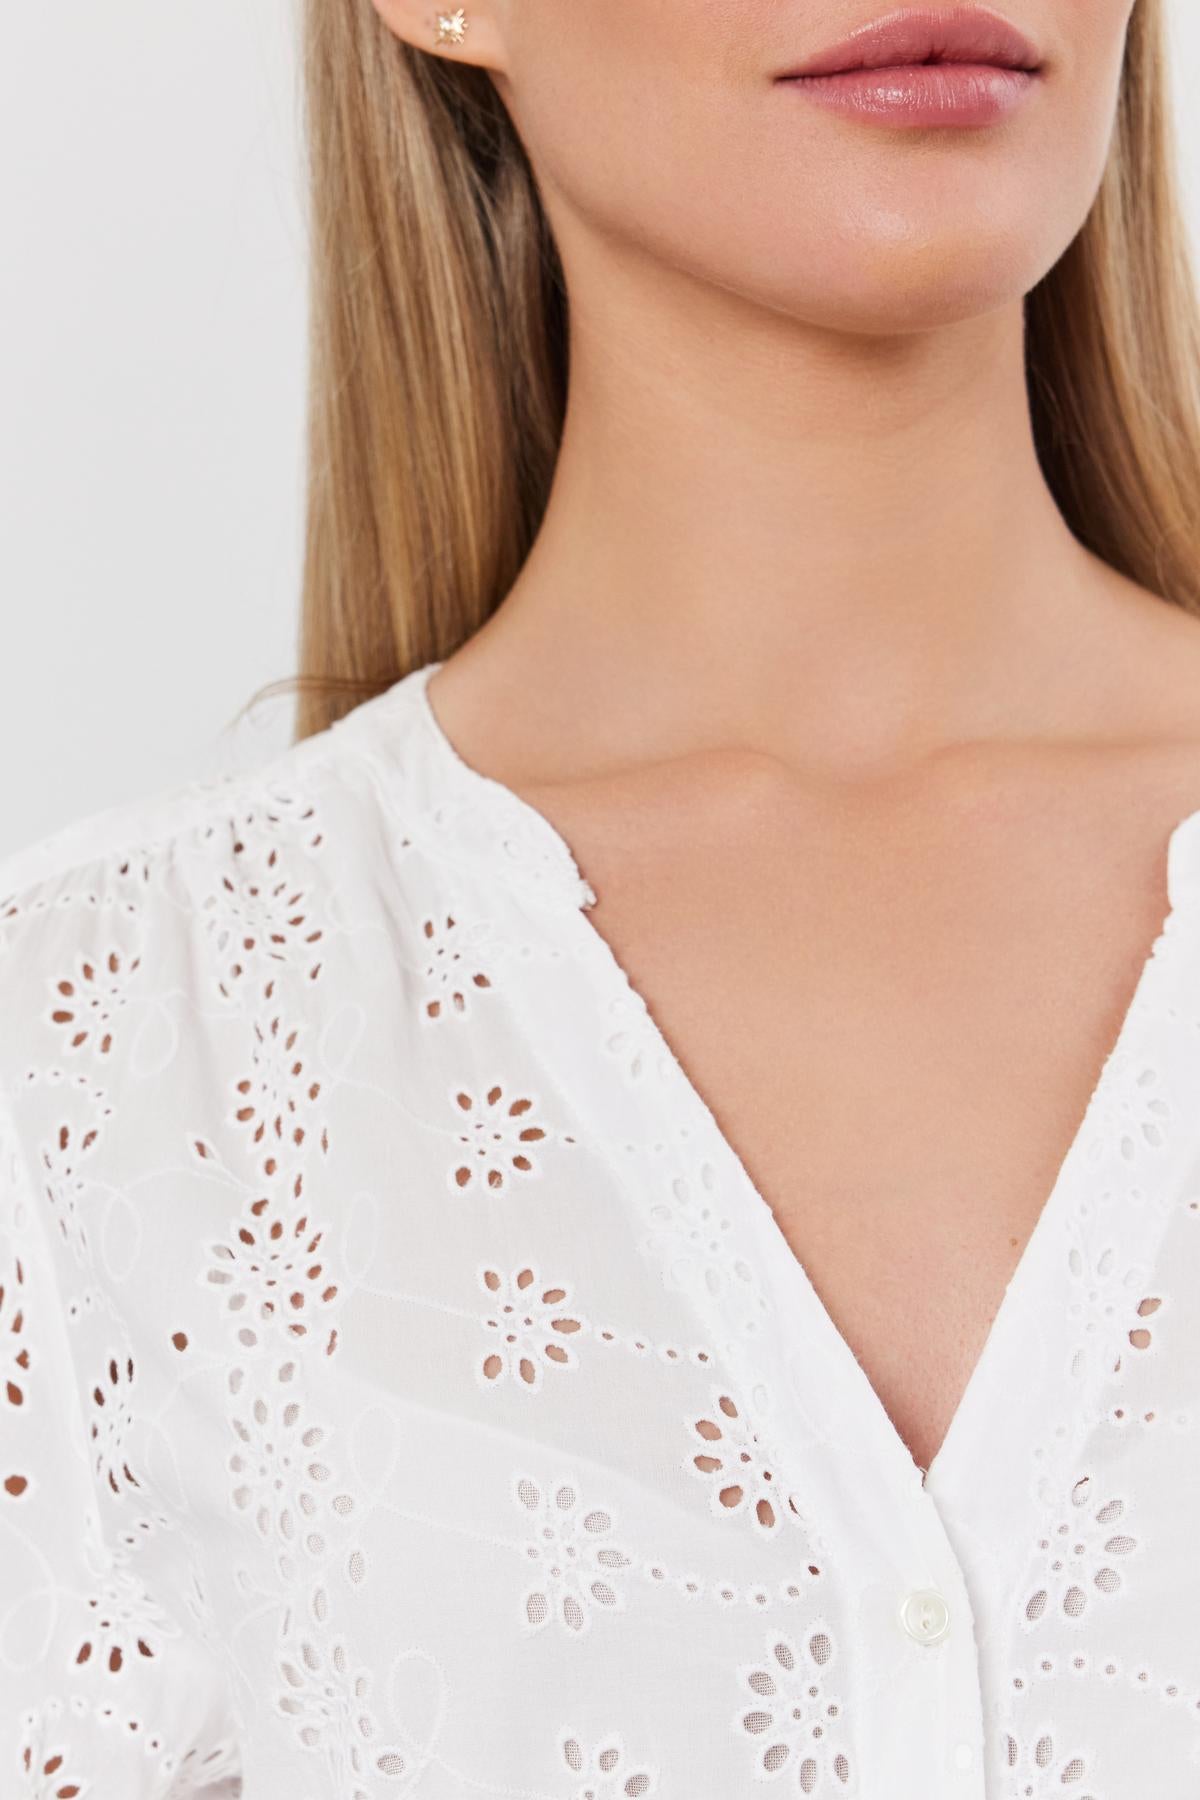   Close-up of a woman wearing a white cotton eyelet RORI DRESS by Velvet by Graham & Spencer with puff sleeves, focusing on the detailed fabric pattern and a small earring. 